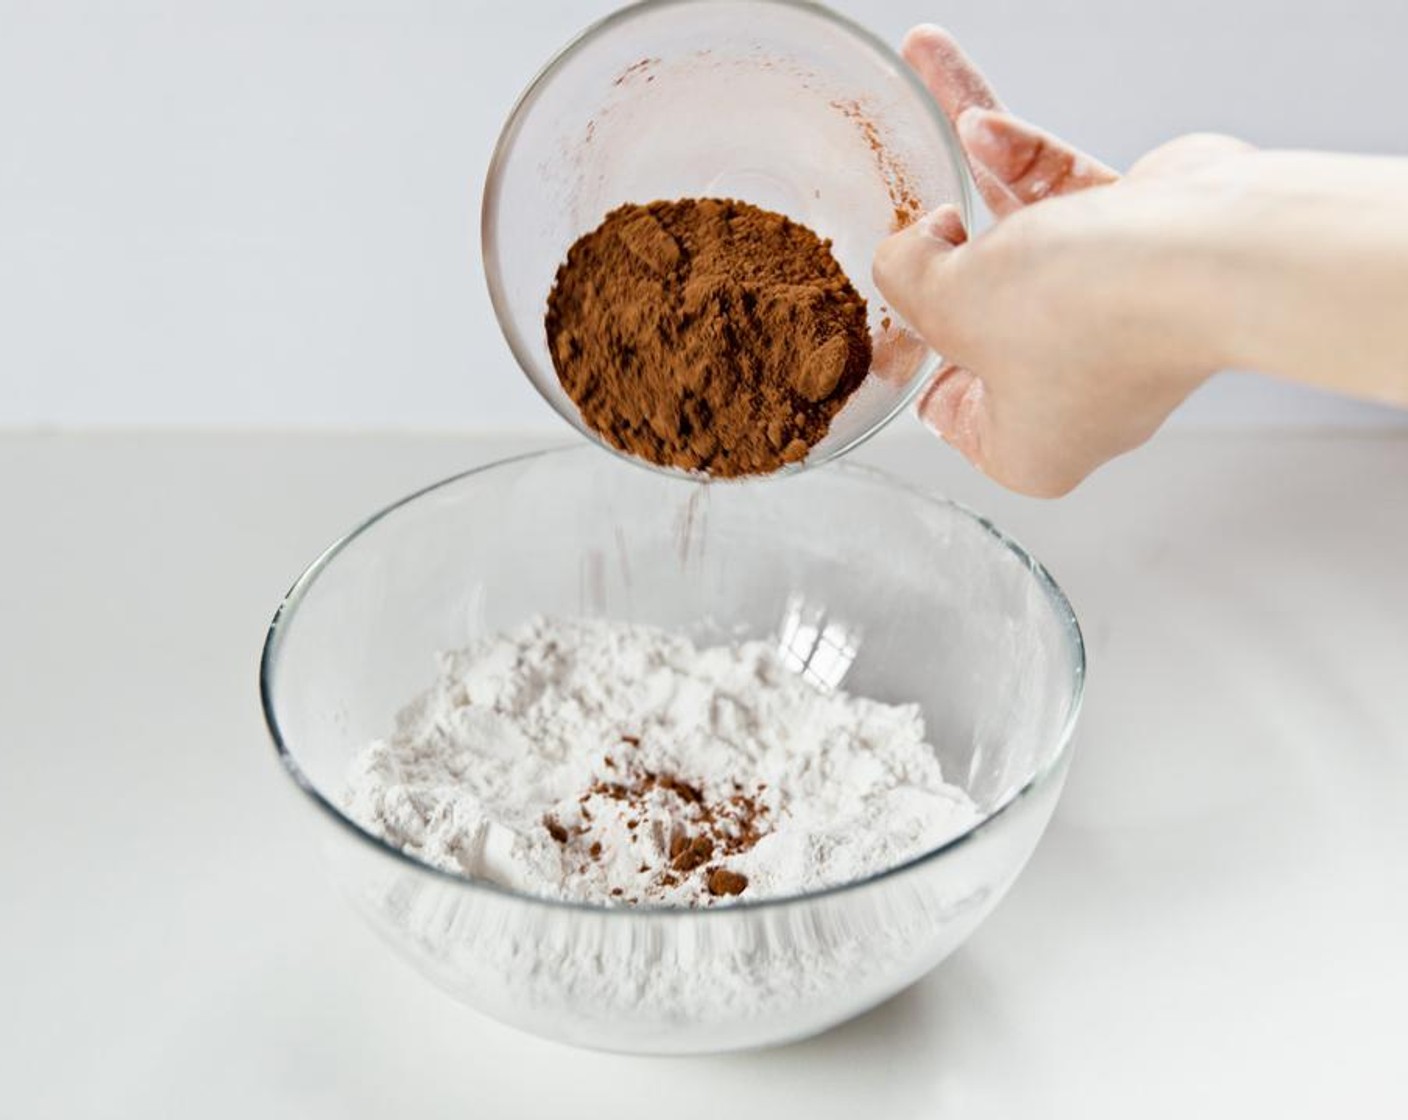 step 5 In a bowl, combine Water (to taste), Sweet Glutinous Rice Flour (1 2/3 cups) and Unsweetened Cocoa Powder (1 cup).